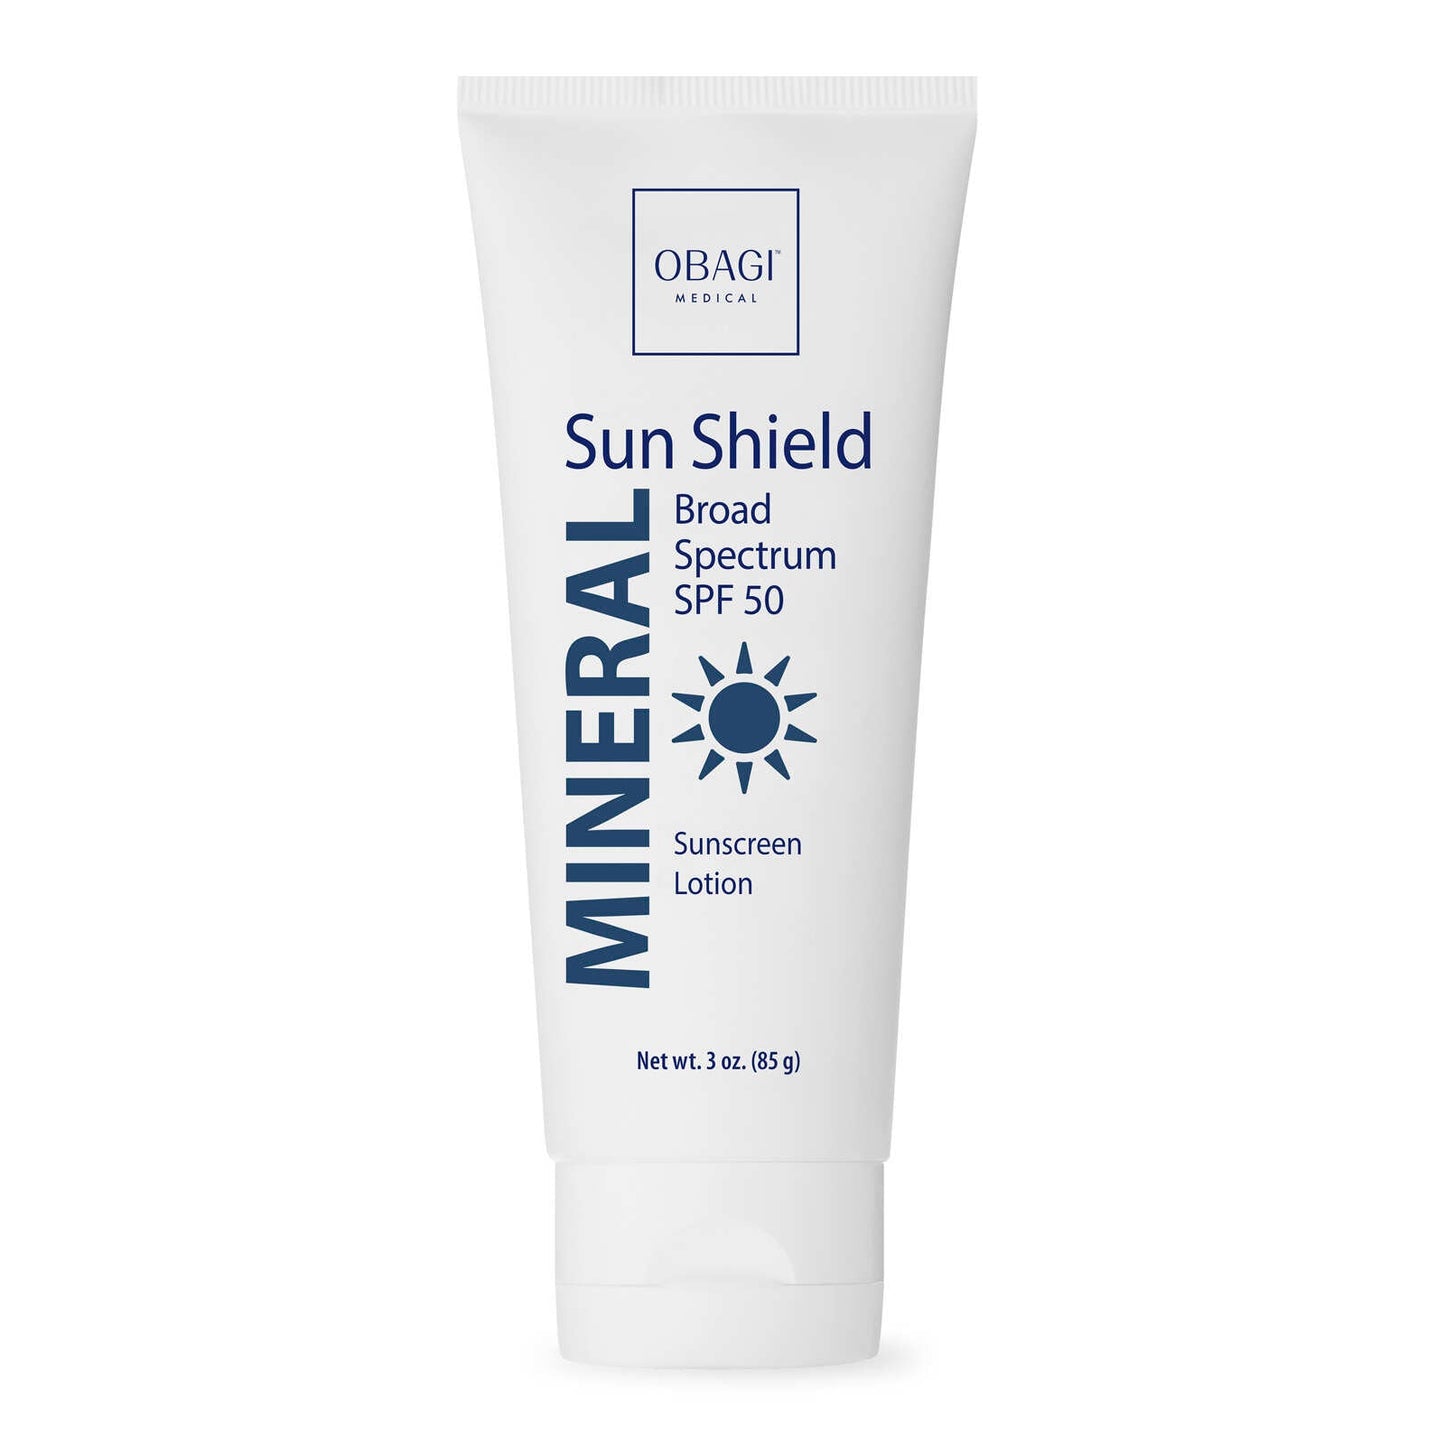 Buy Online Best OBAGI - Sun Shield Mineral SPF 50 | Buy innovative clinical skincare products - TOPBODY